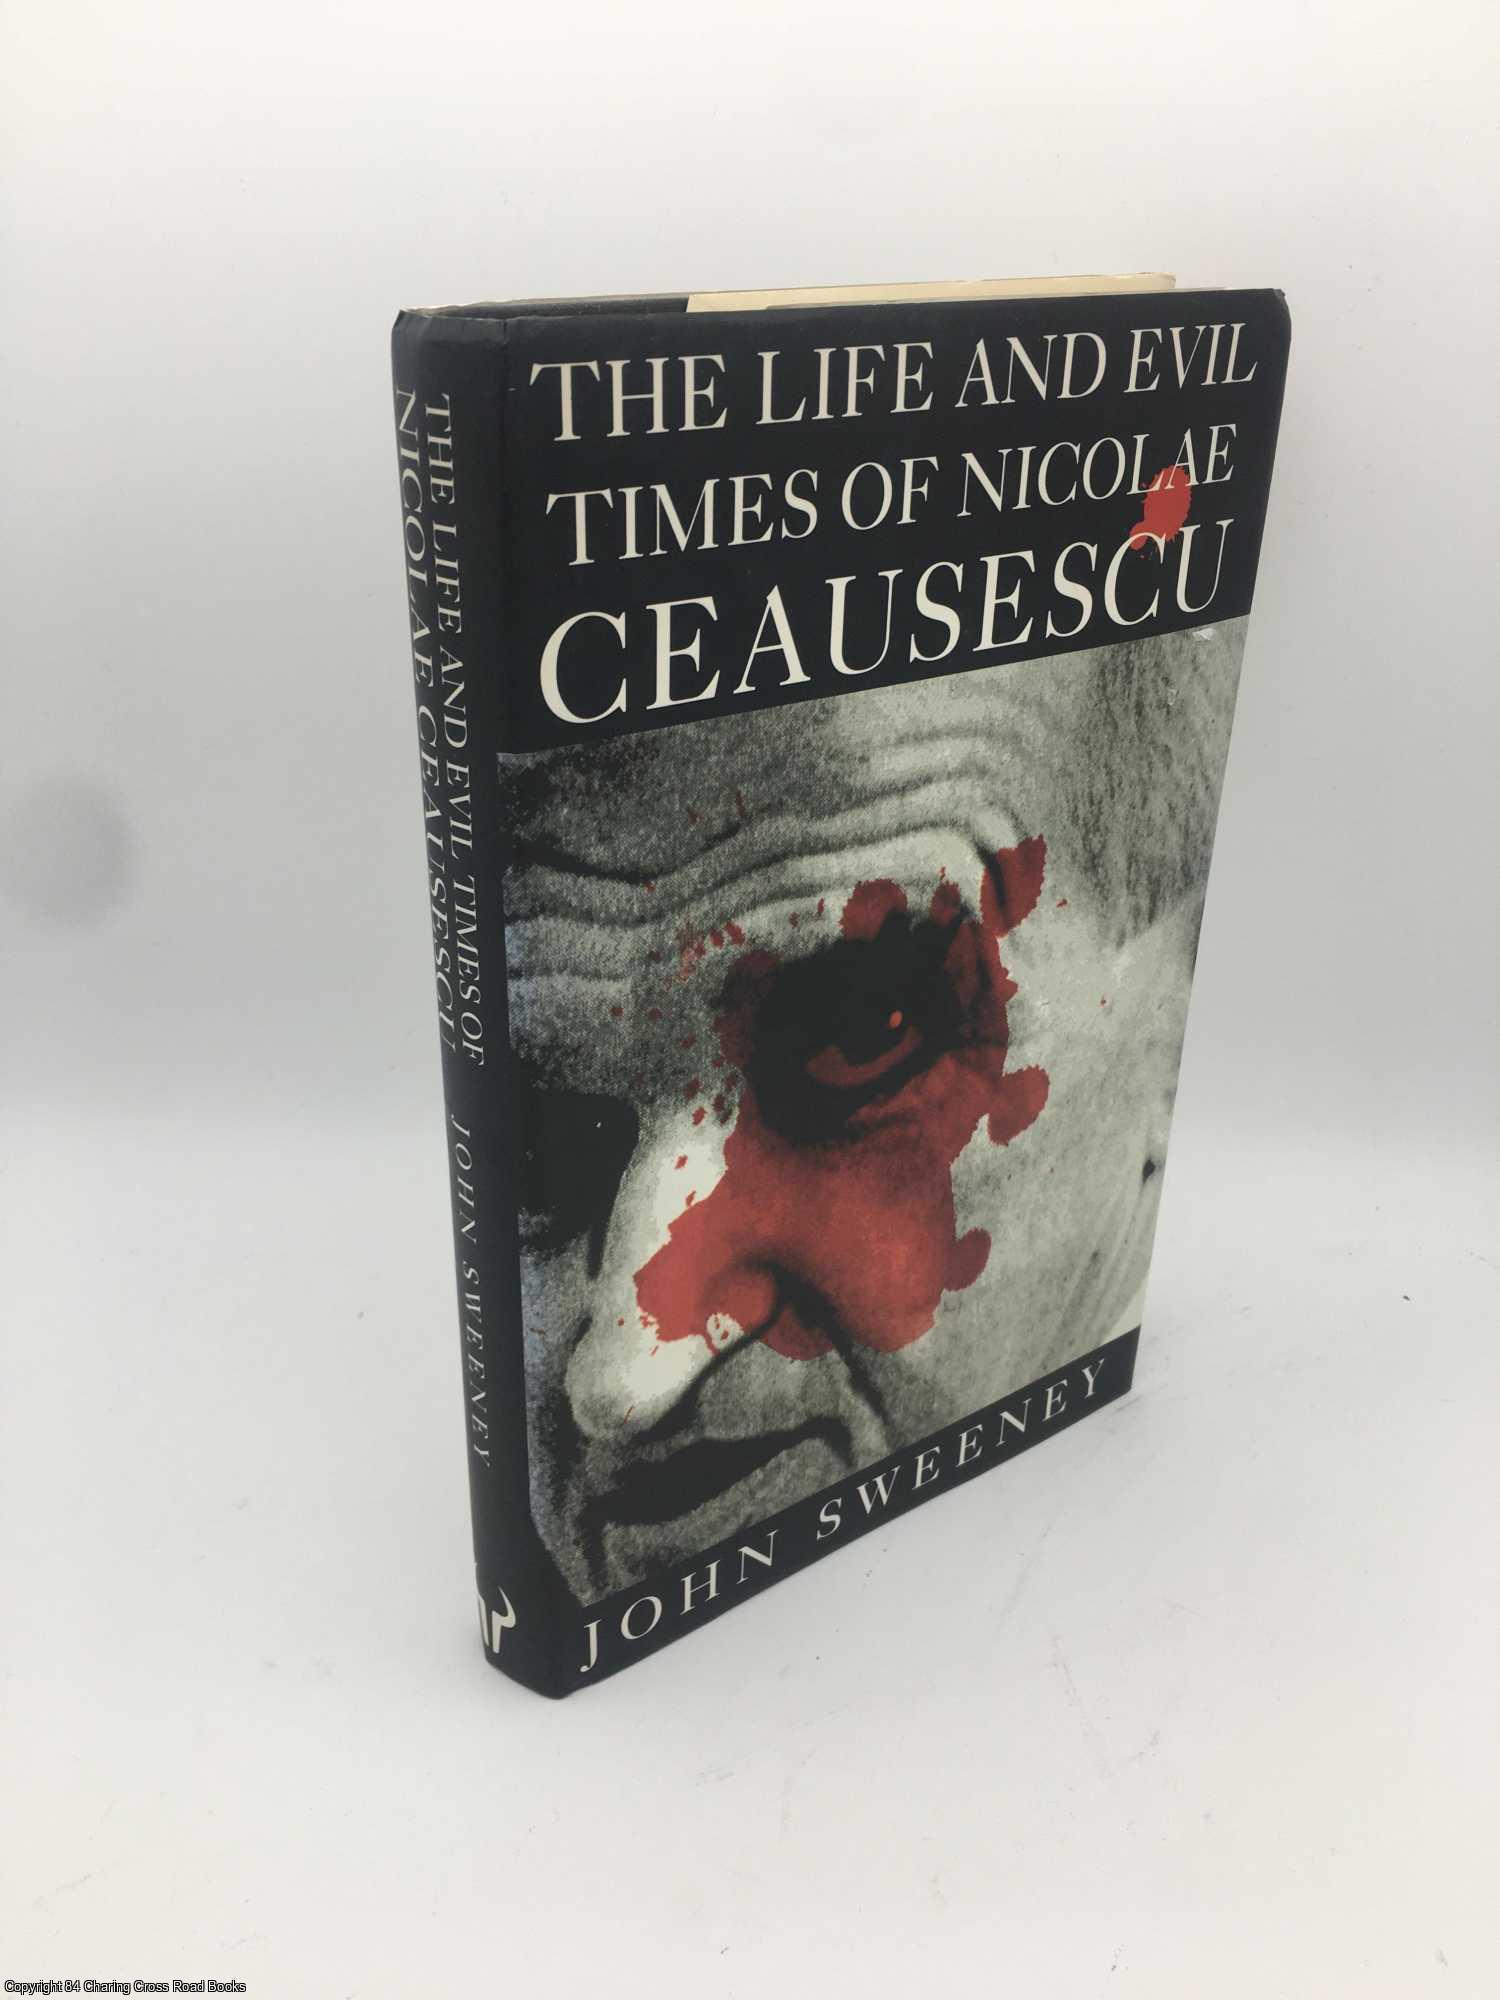 Sweeney, John - The Life and Evil Times of Nicolae Ceausescu